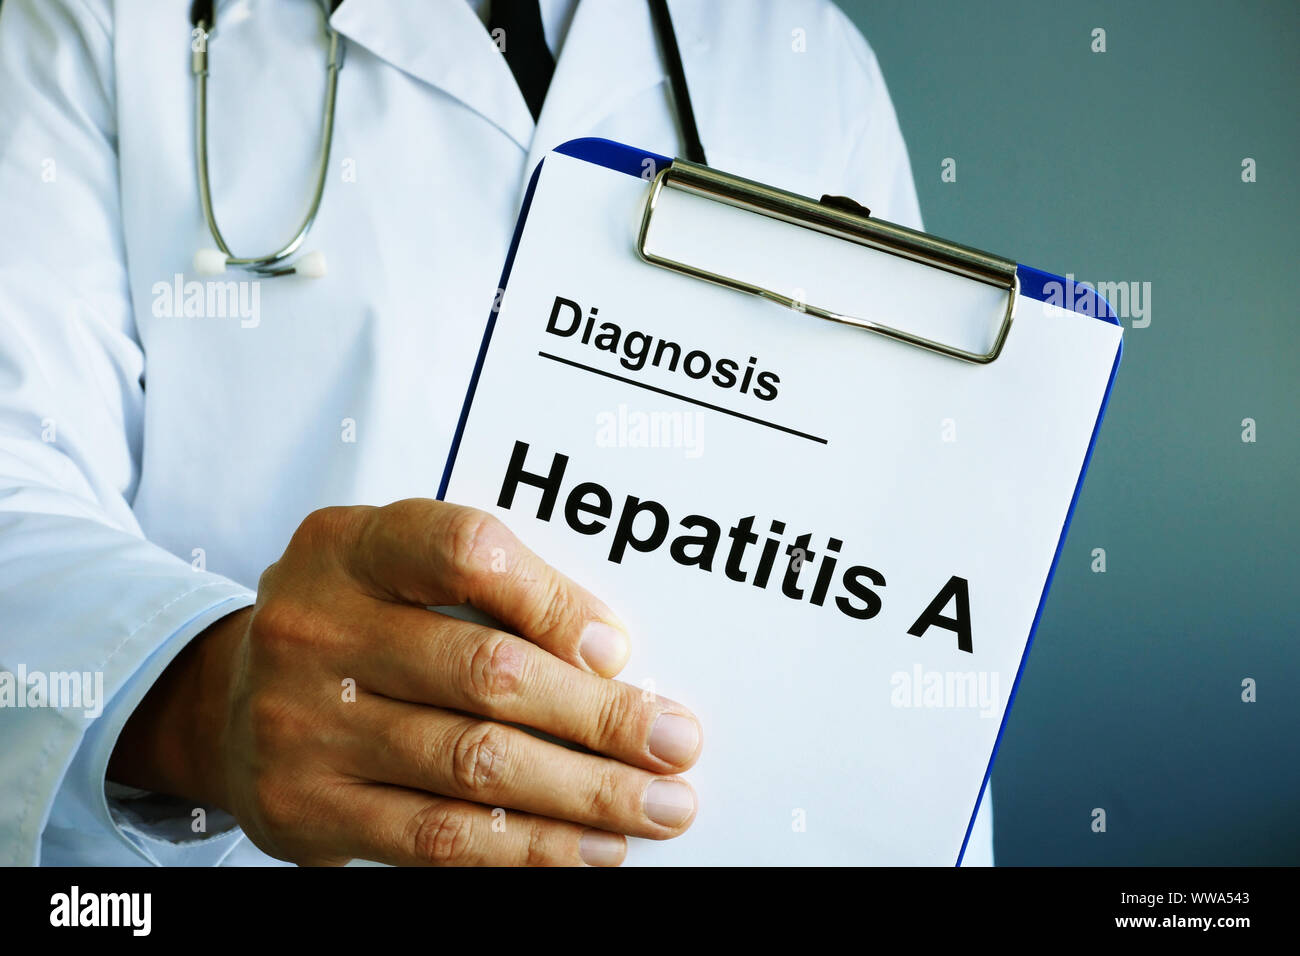 Hepatitis A diagnosis in the hands of a doctor. Stock Photo